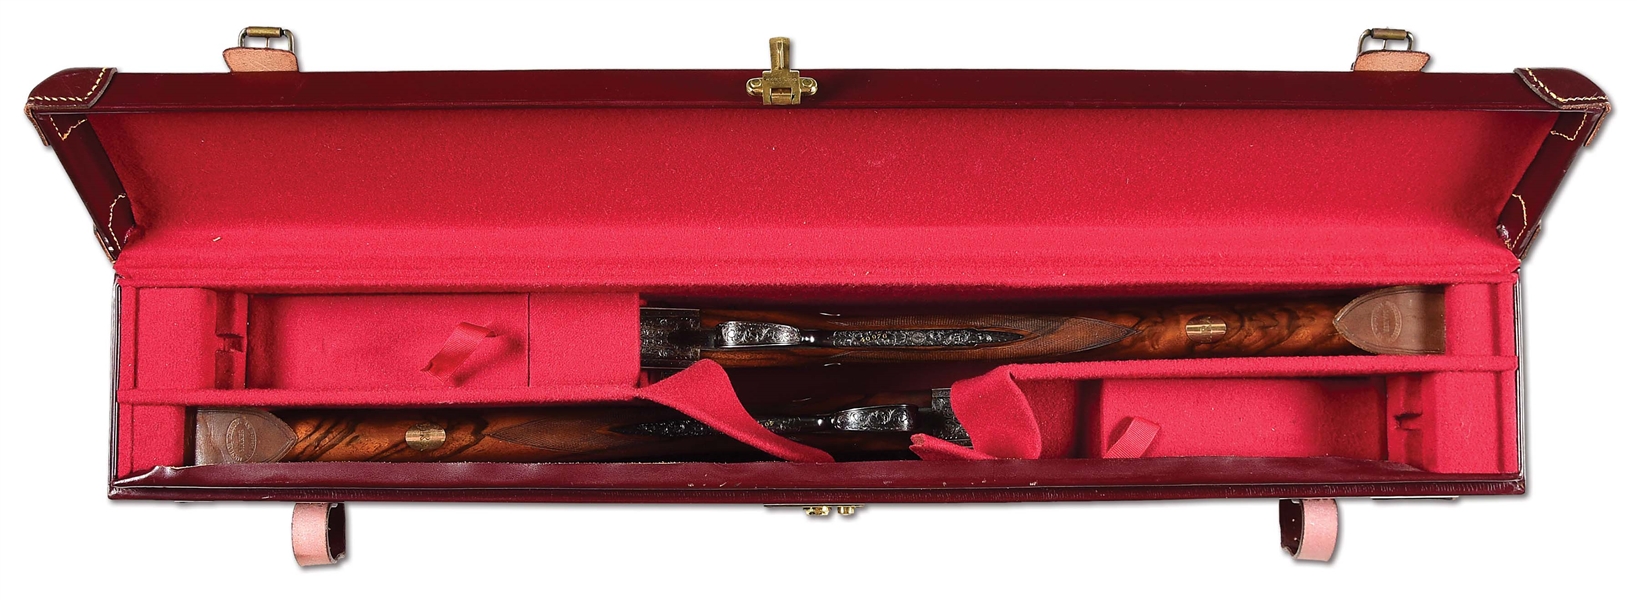 (M) PAIR OF 20 GAUGE HOLLAND & HOLLAND ROYAL DELUXE SIDELOCK EJECTOR SINGLE TRIGGER SELF OPENING GAME GUNS WITH CASE.